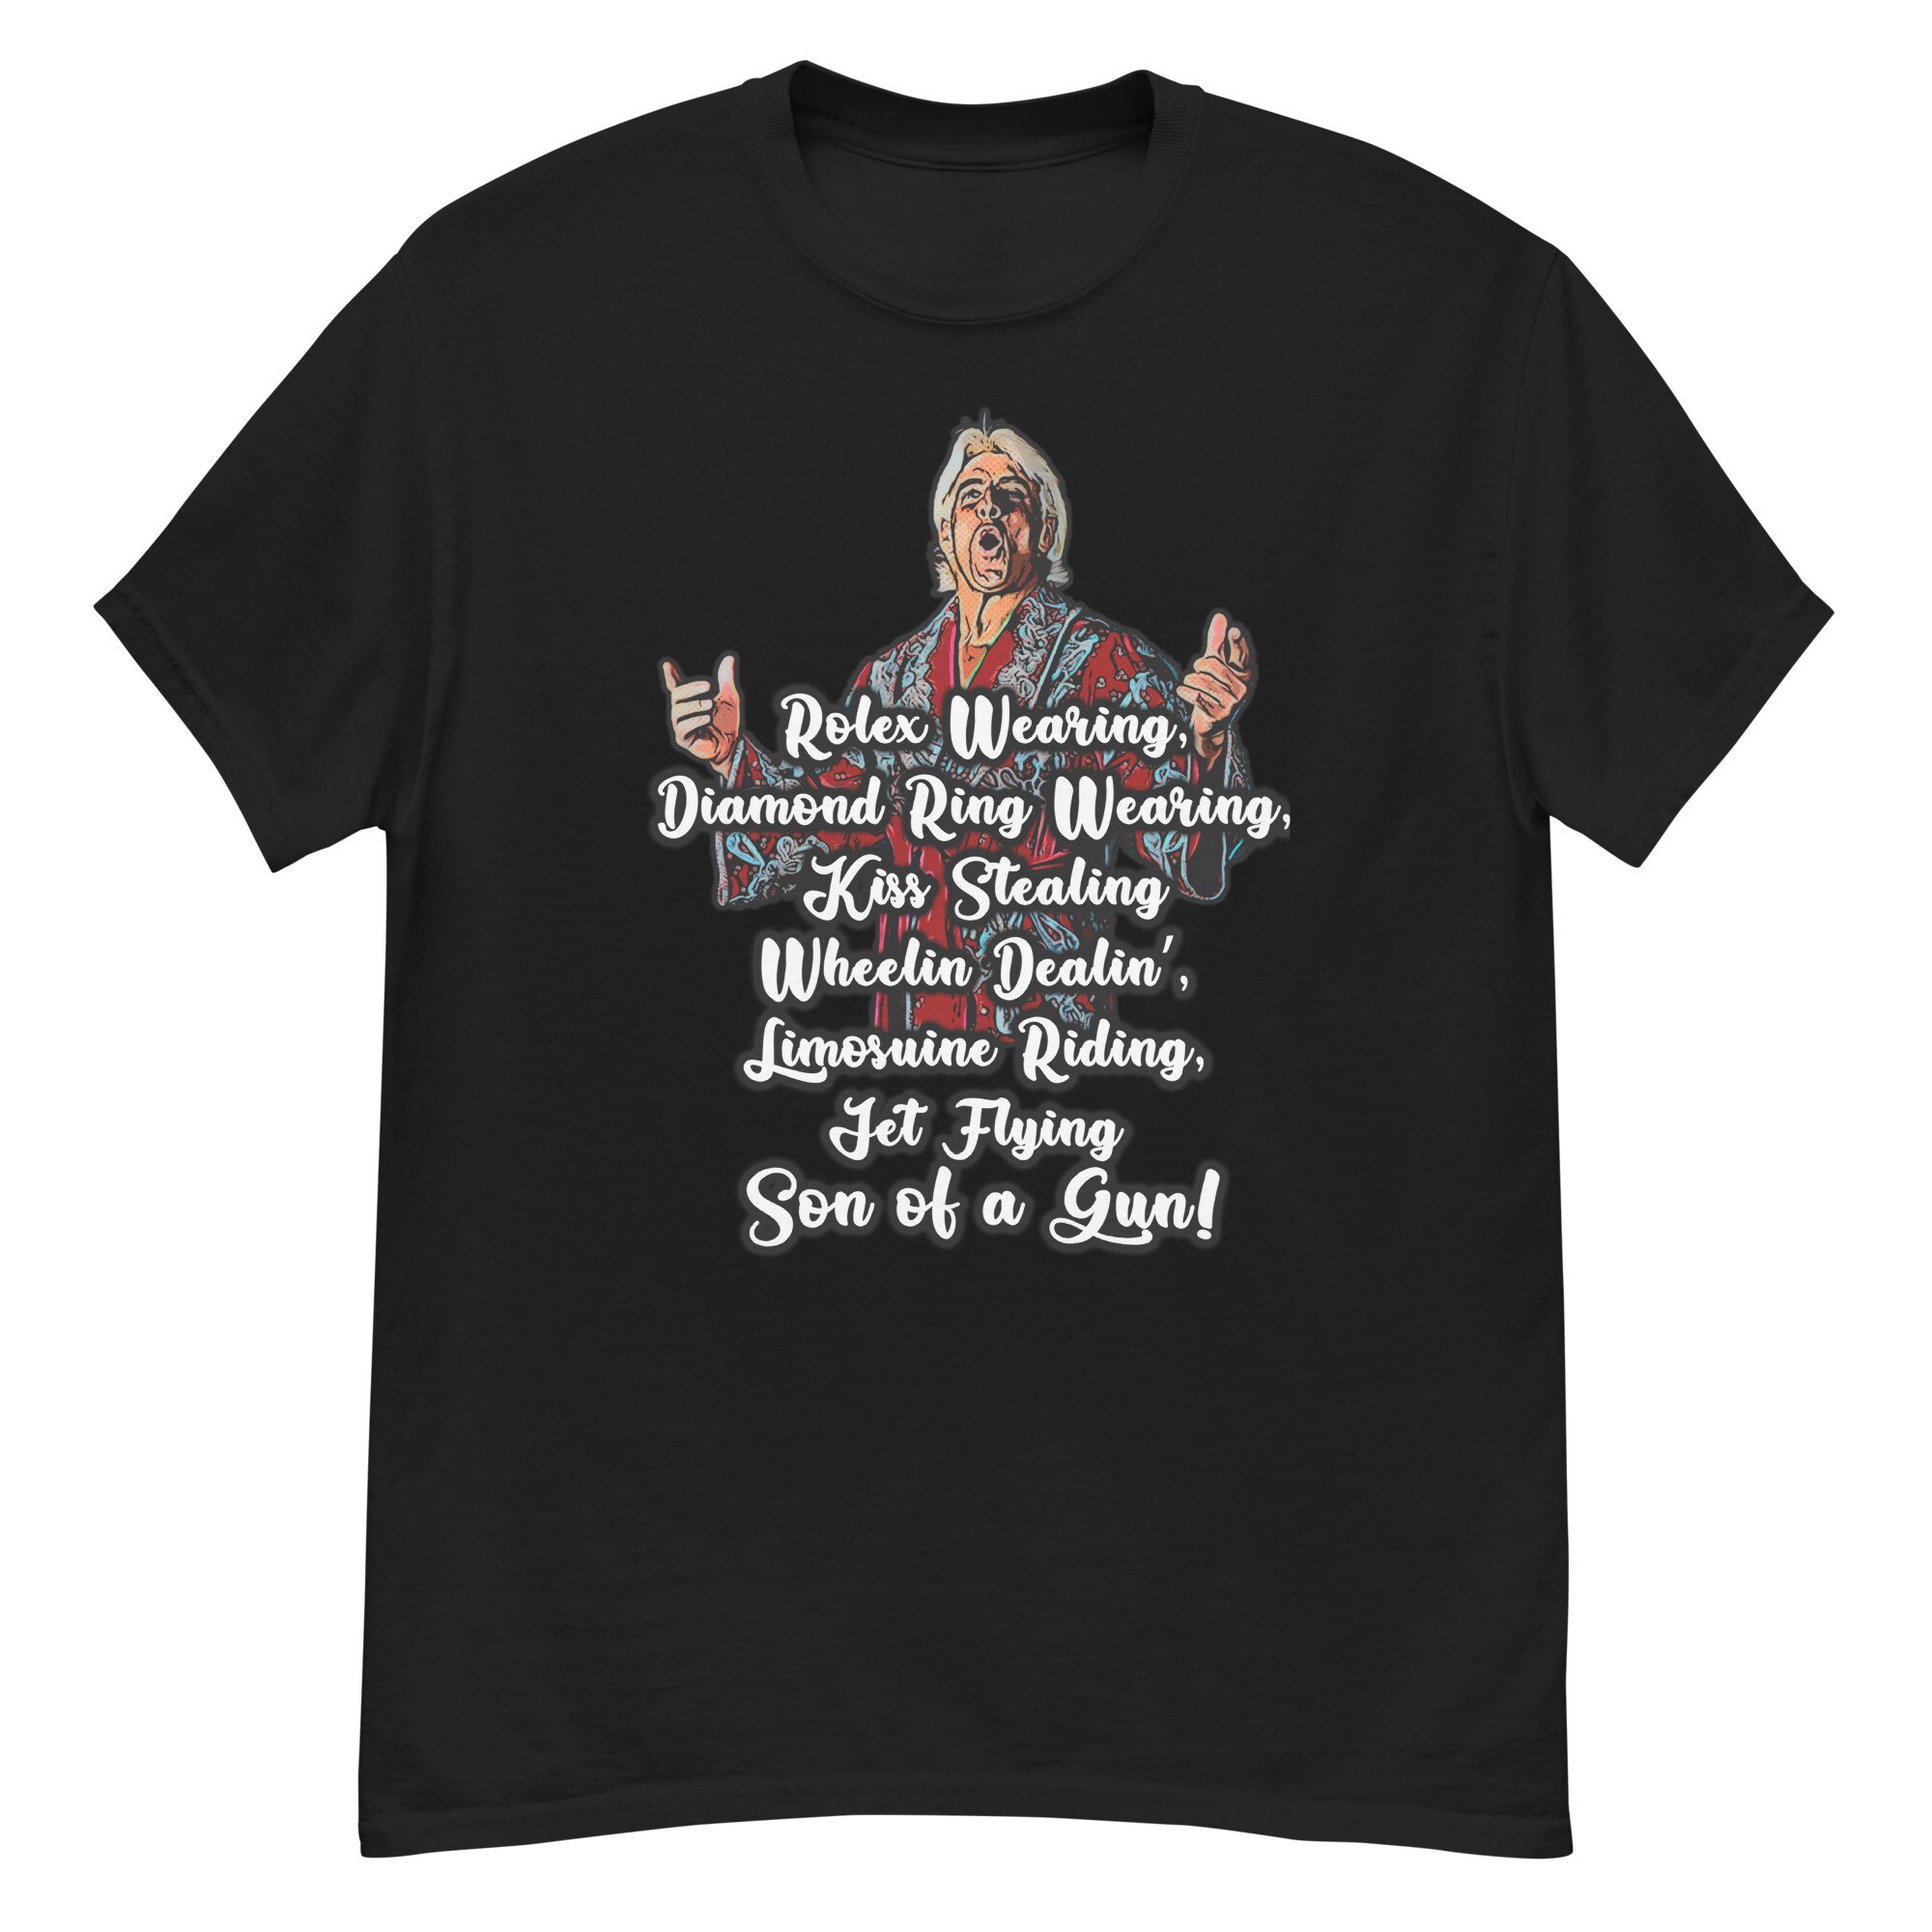 Discover Ric flair tshirt 80s wrestling tee